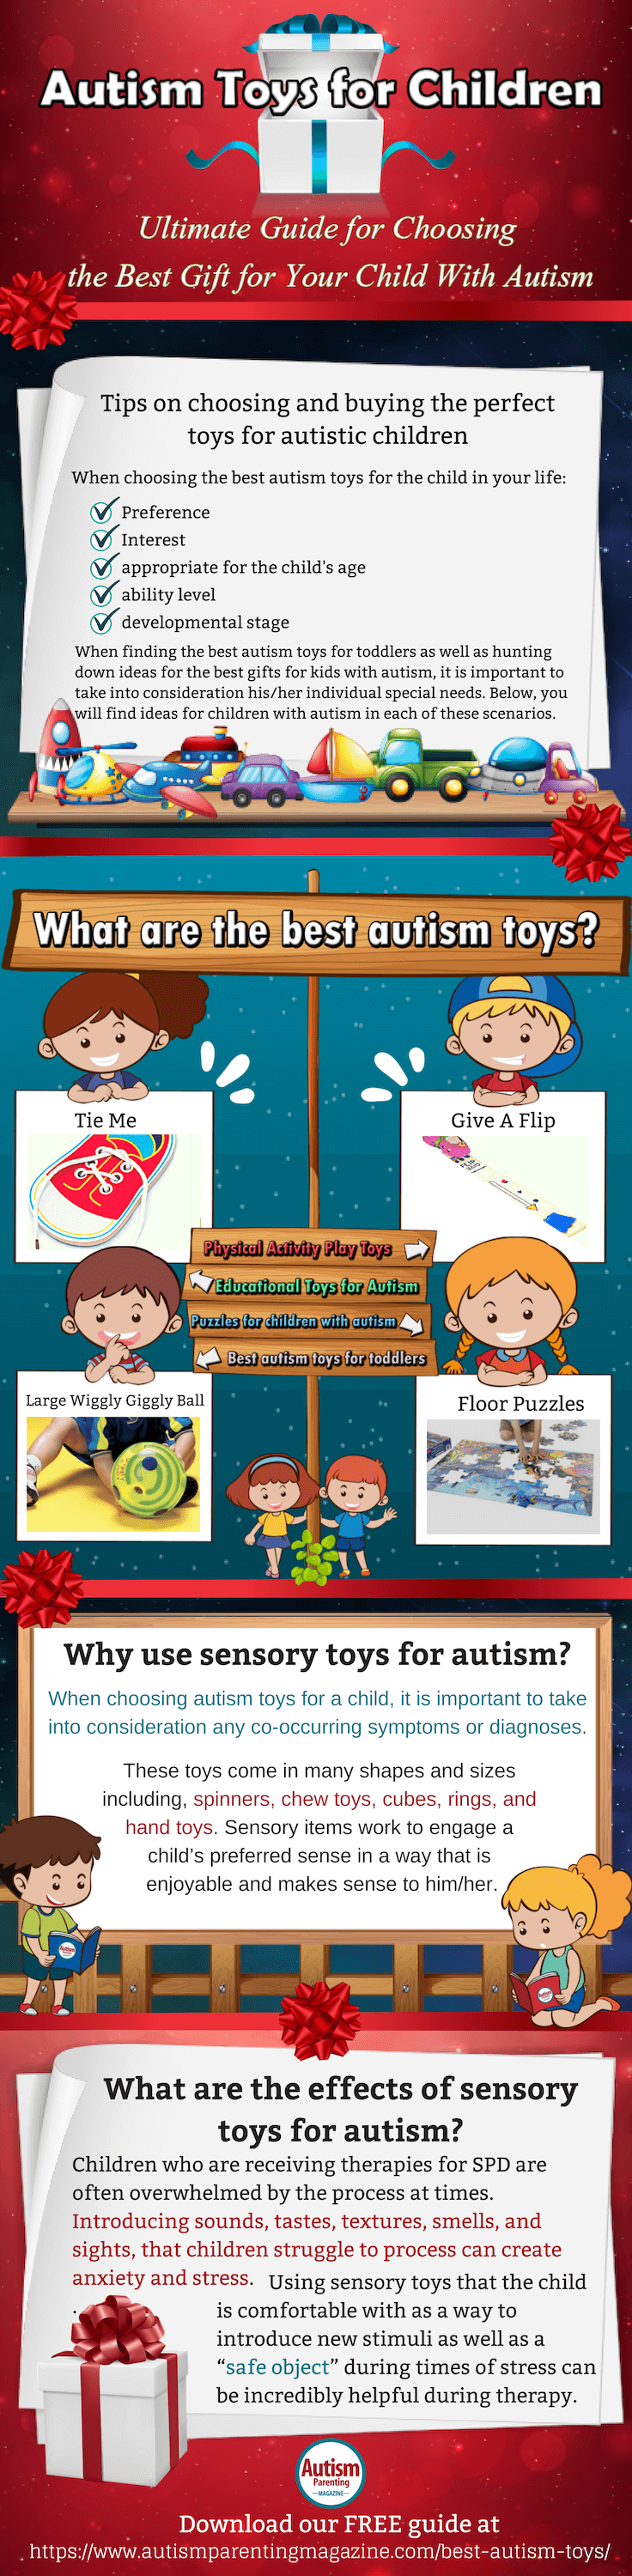 Autism Toys for Children_ Ultimate Guide for Choosing the Best Gift for Your Child With Autism-infographic-plaza